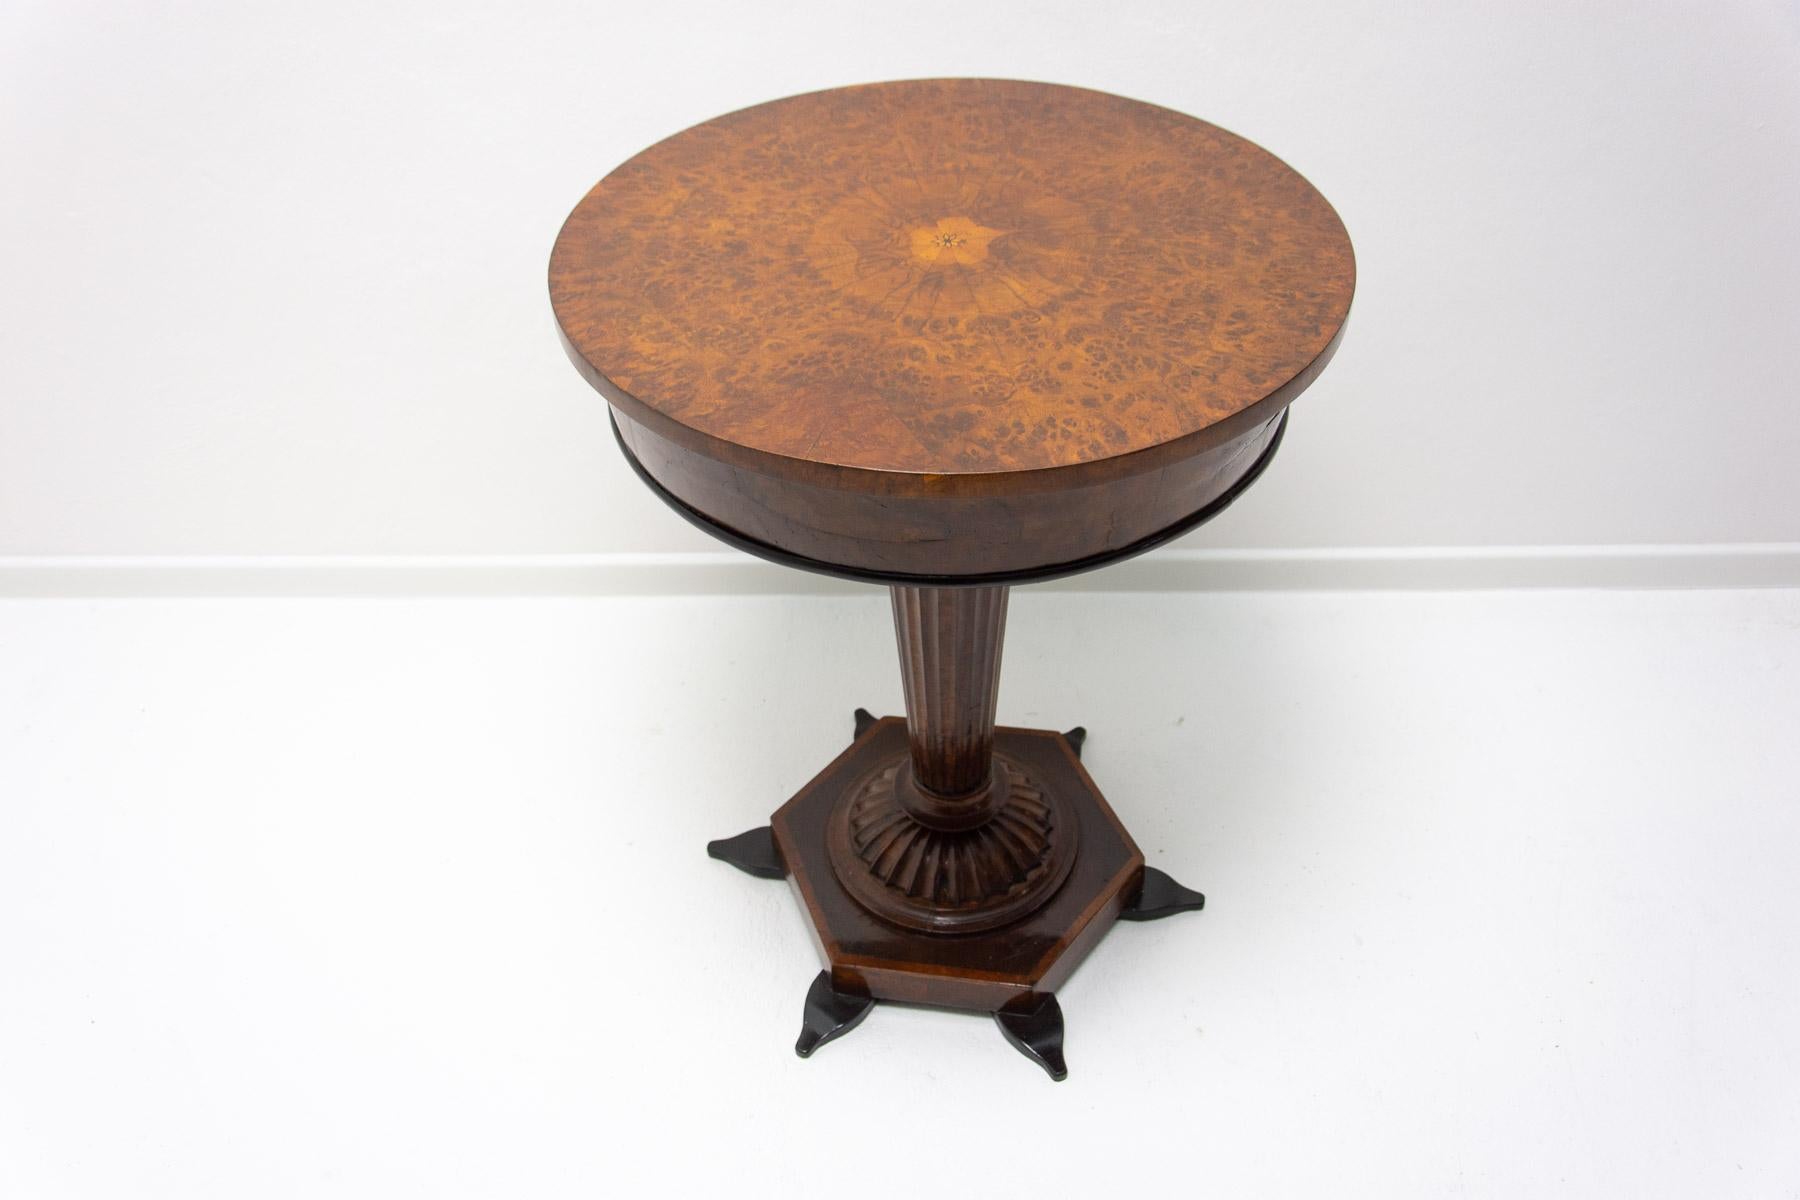 Wood Completely Restored Neo-Baroque Card Table, Late 19th Century, Austria-Hungary For Sale